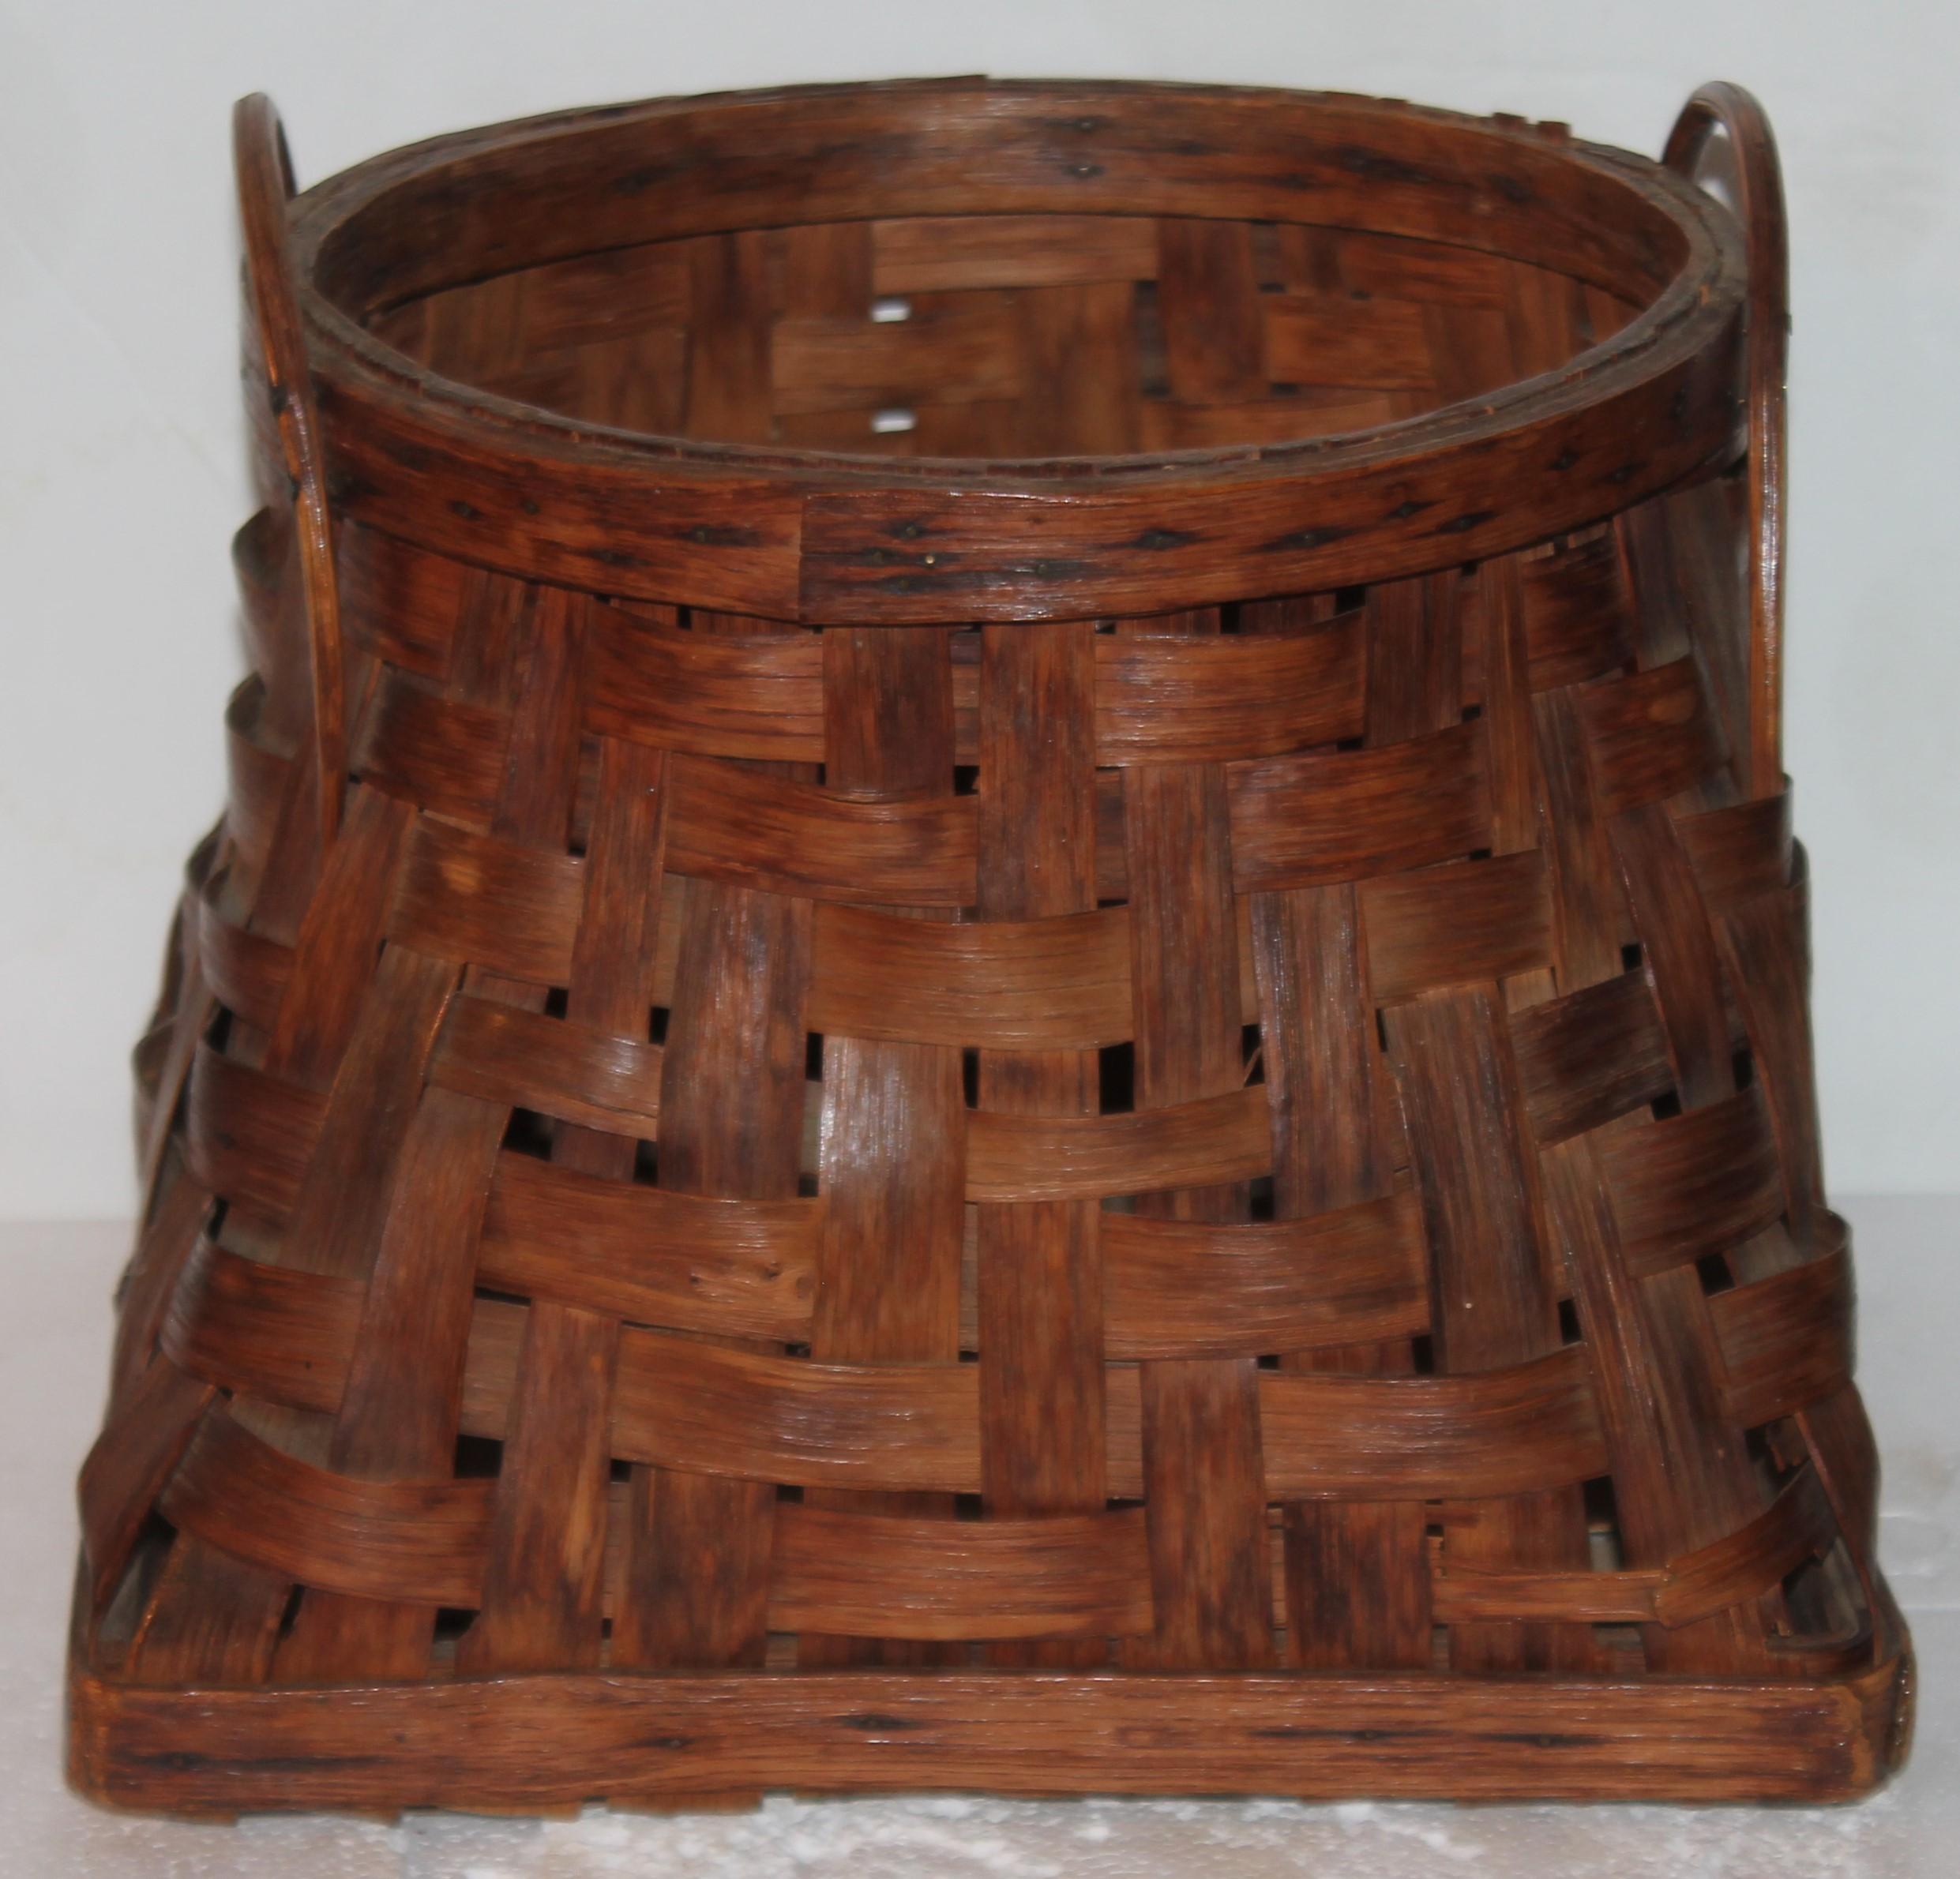 This fine detailed hand made basket with tiny handles is in great as found condition. Very unusual size and scale. Found in New England. This split oak and hickory woods are in fine condition with minor wear.